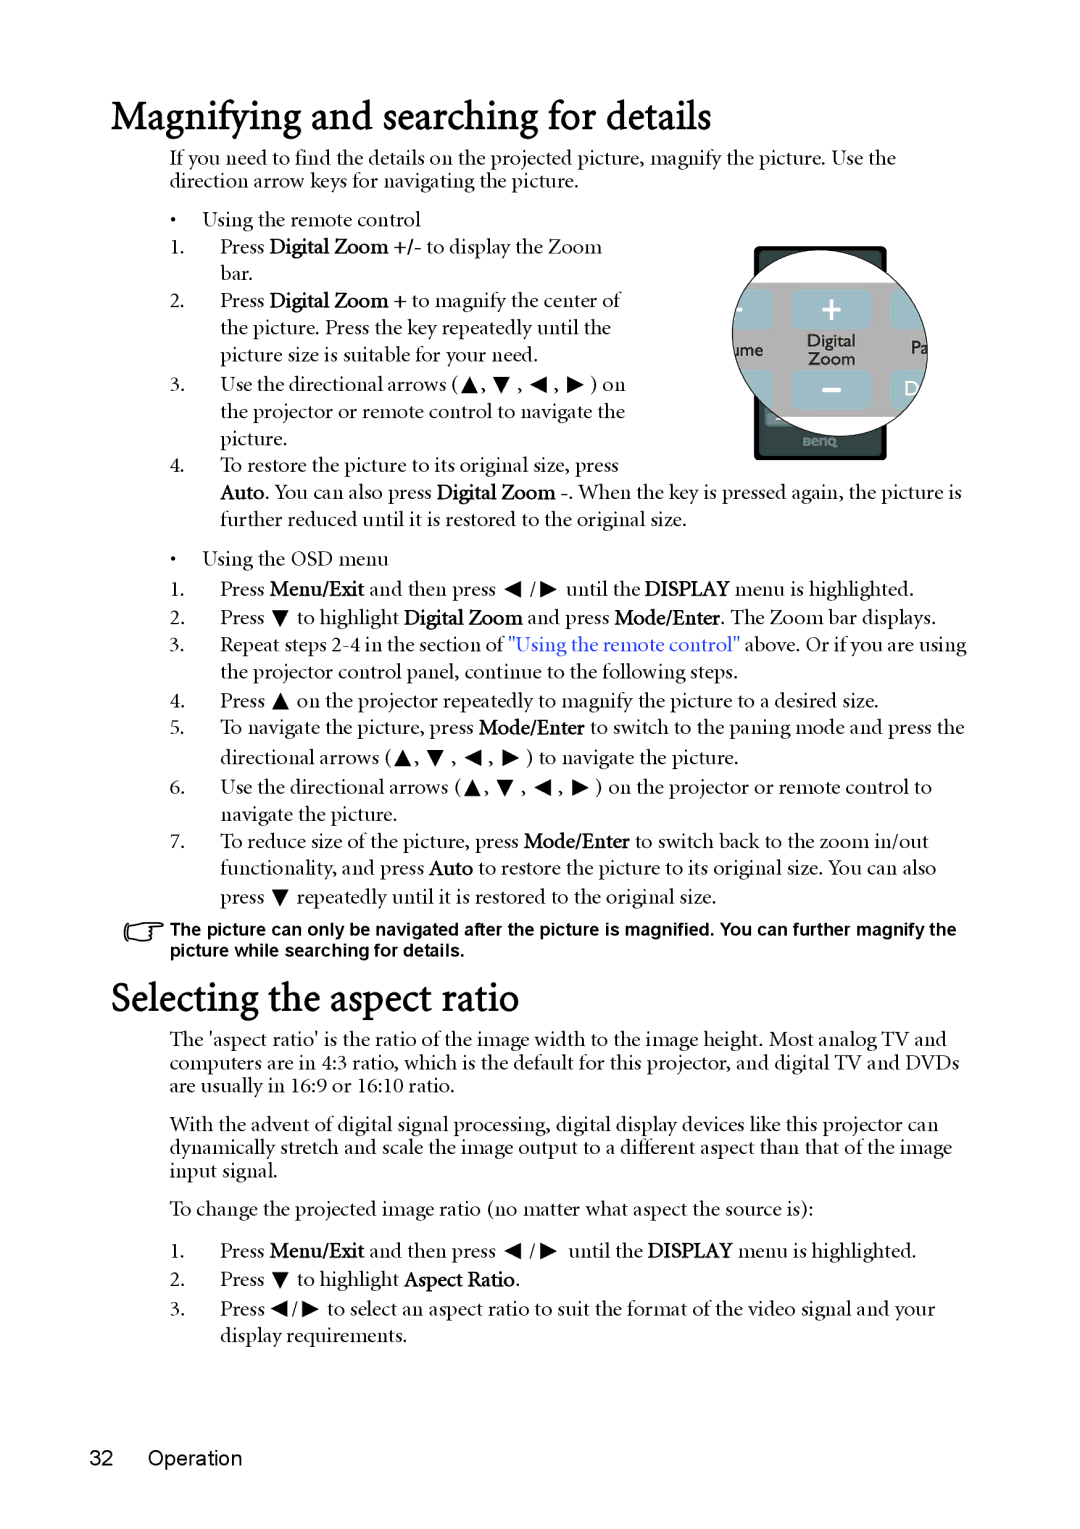 BenQ MW512 user manual Magnifying and searching for details, Selecting the aspect ratio 